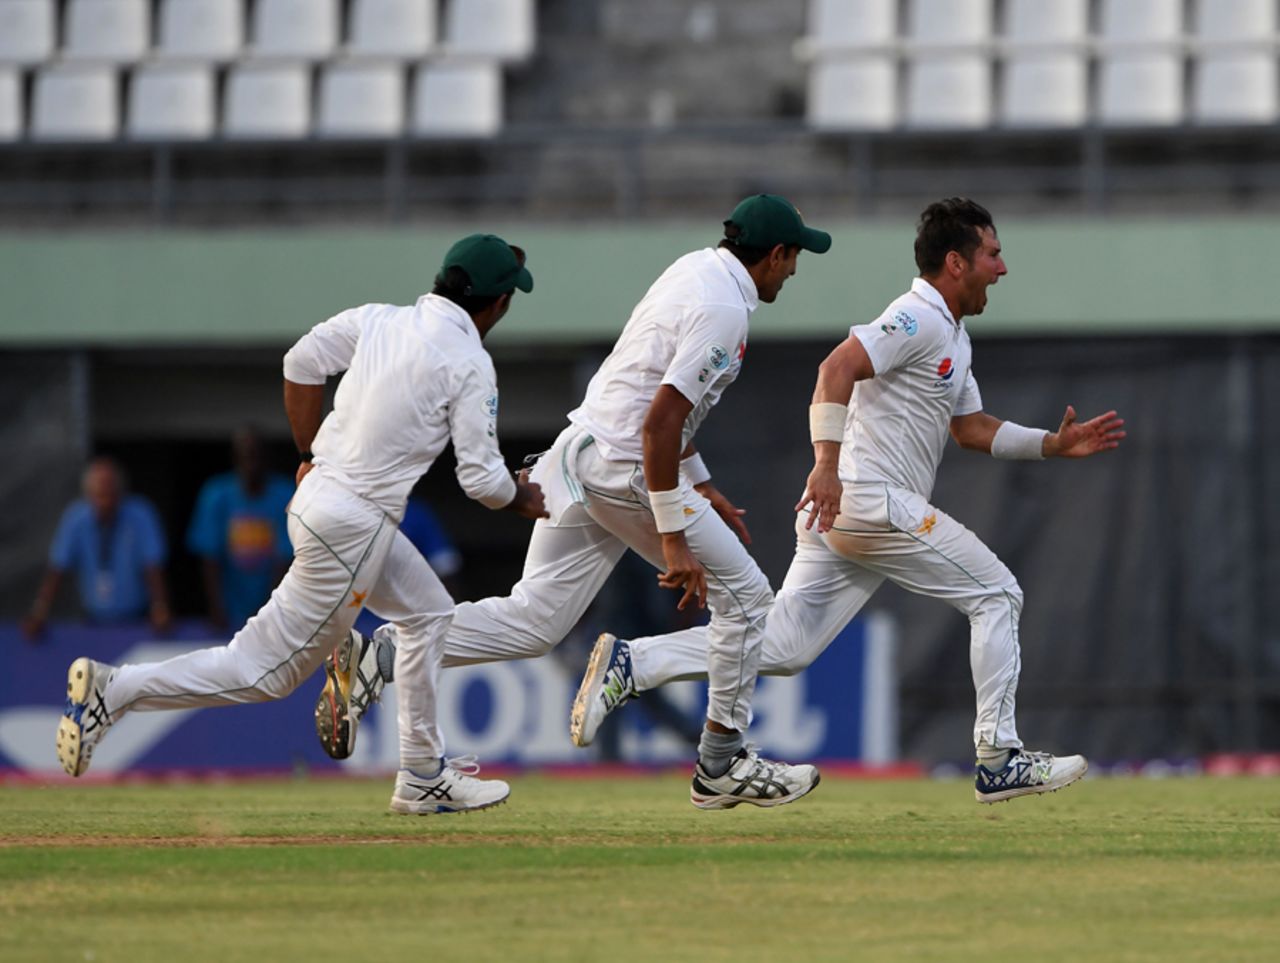 Yasir Shah celebrates the final wicket of the West Indies innings with his team-mates, West Indies v Pakistan, 3rd Test, Dominica, 5th day, May 14, 2017